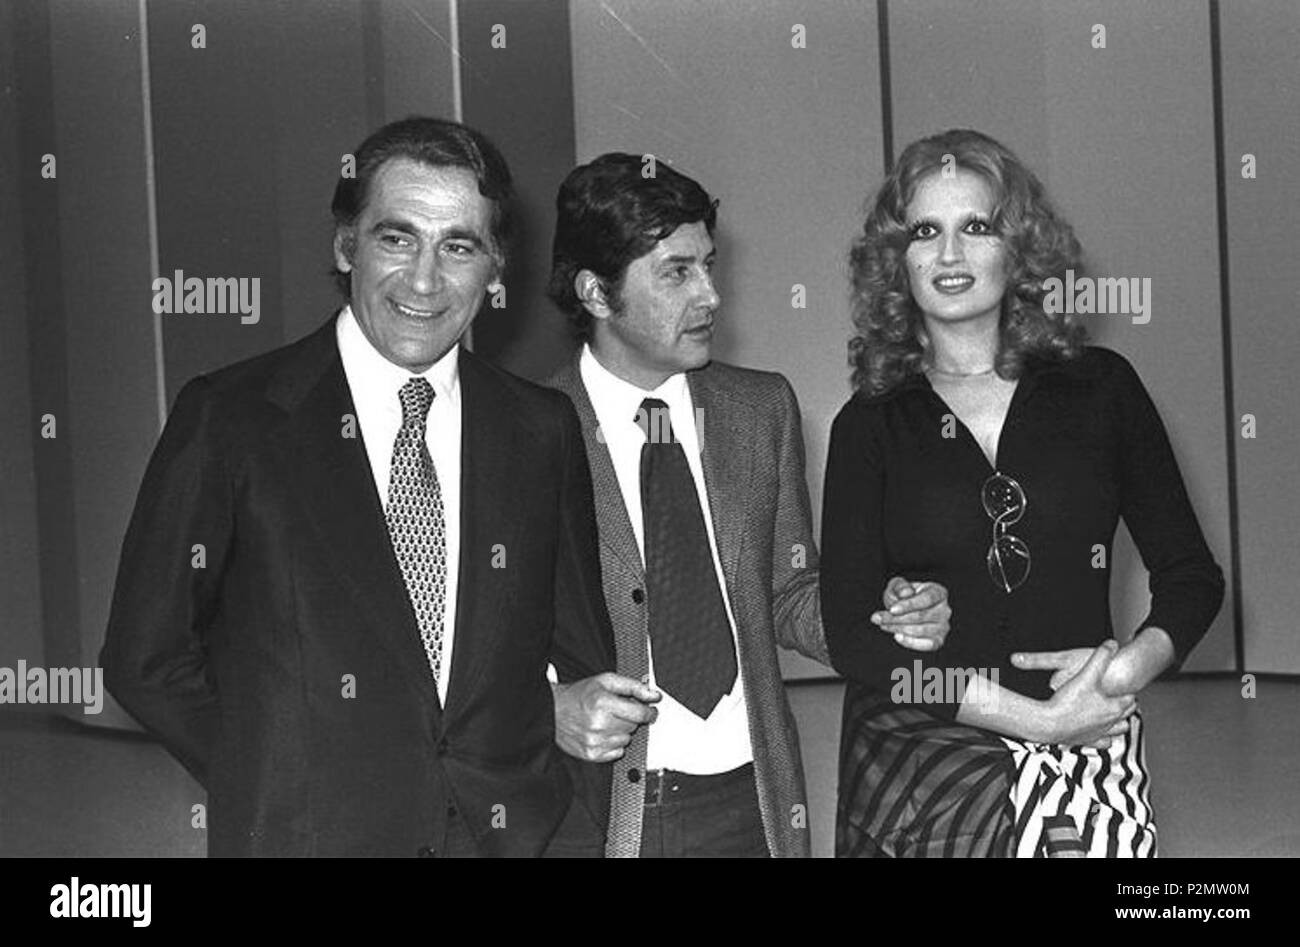 . From left to right the Italian actor Alberto Lupo, the director Antonello Falqui and the singer Mina. The former and the latter were presenters of Teatro 10, a TV show broadcast by RAI; Antonello Falqui was its director. 1972. Unknown 74 RAI Teatro 10 Alberto Lupo Antonello Falqui Mina 1972 Stock Photo